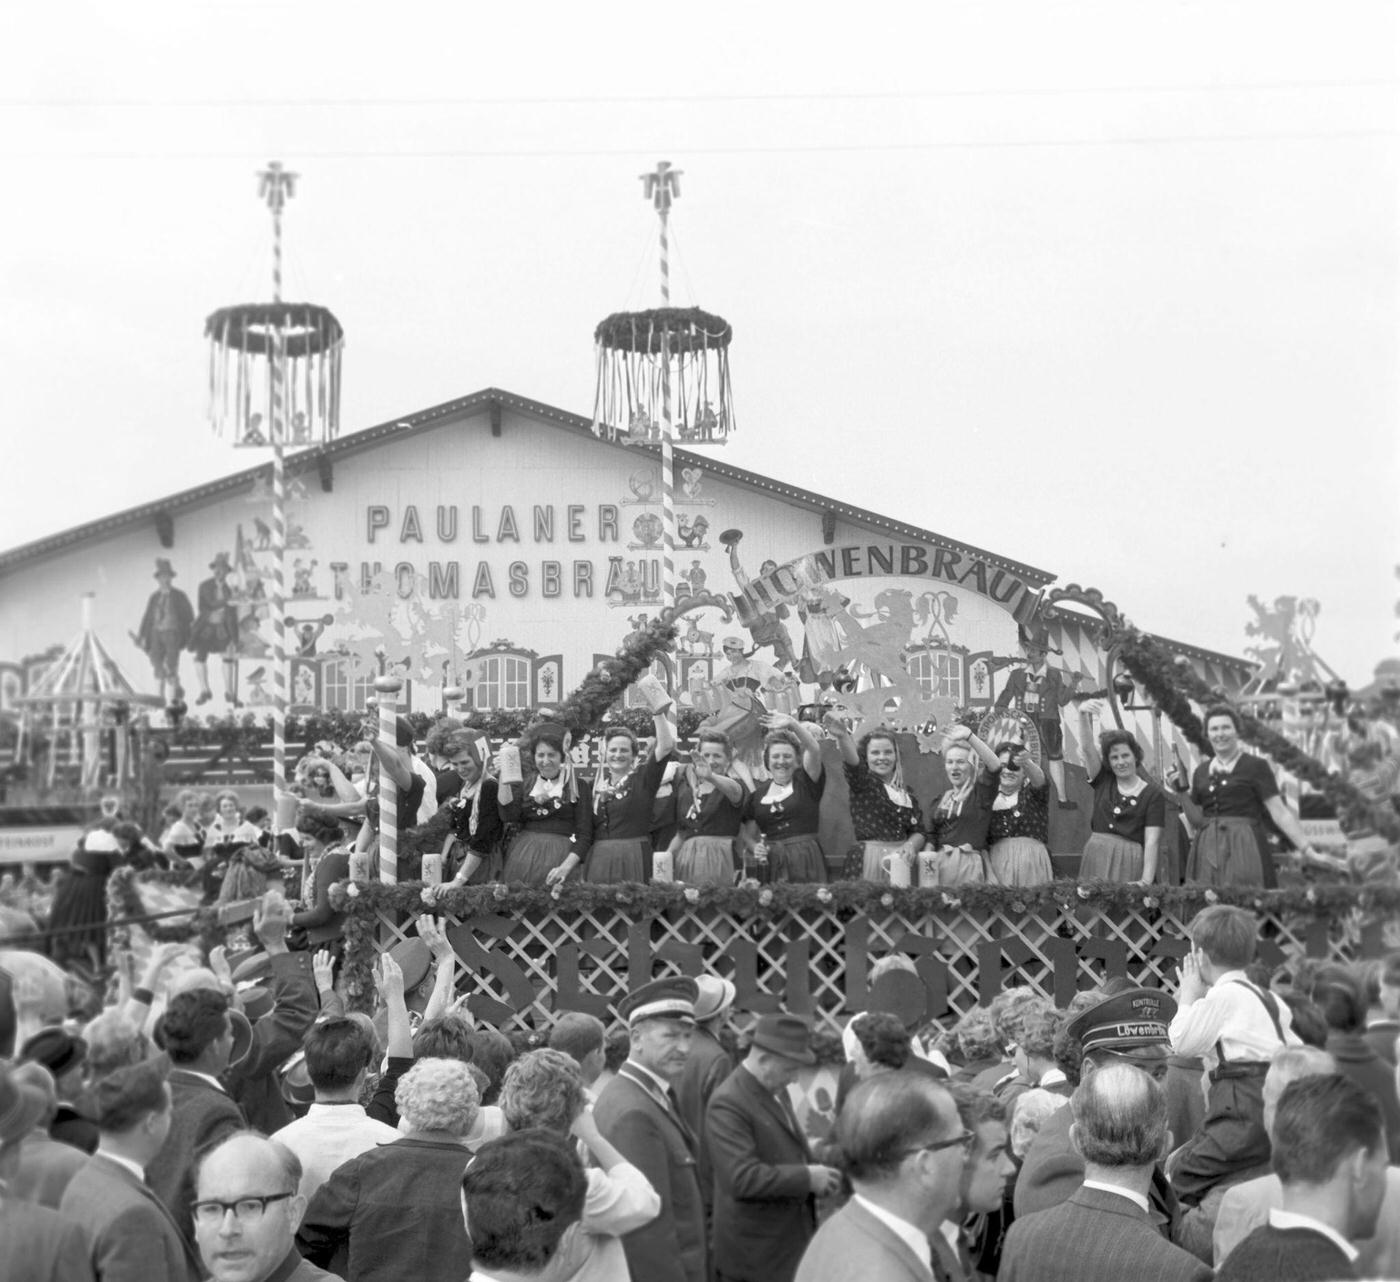 Wiesn waitresses arrive at Paulaner marquee, 1963.